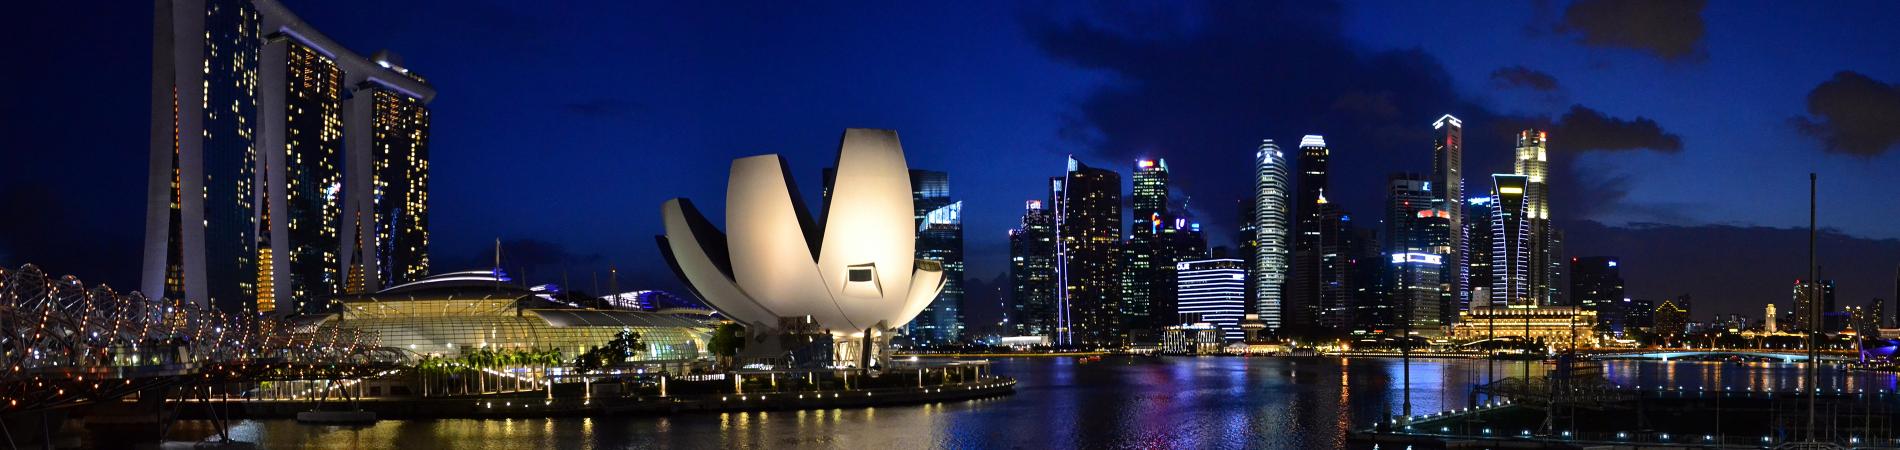 Image for Things to do in Singapore